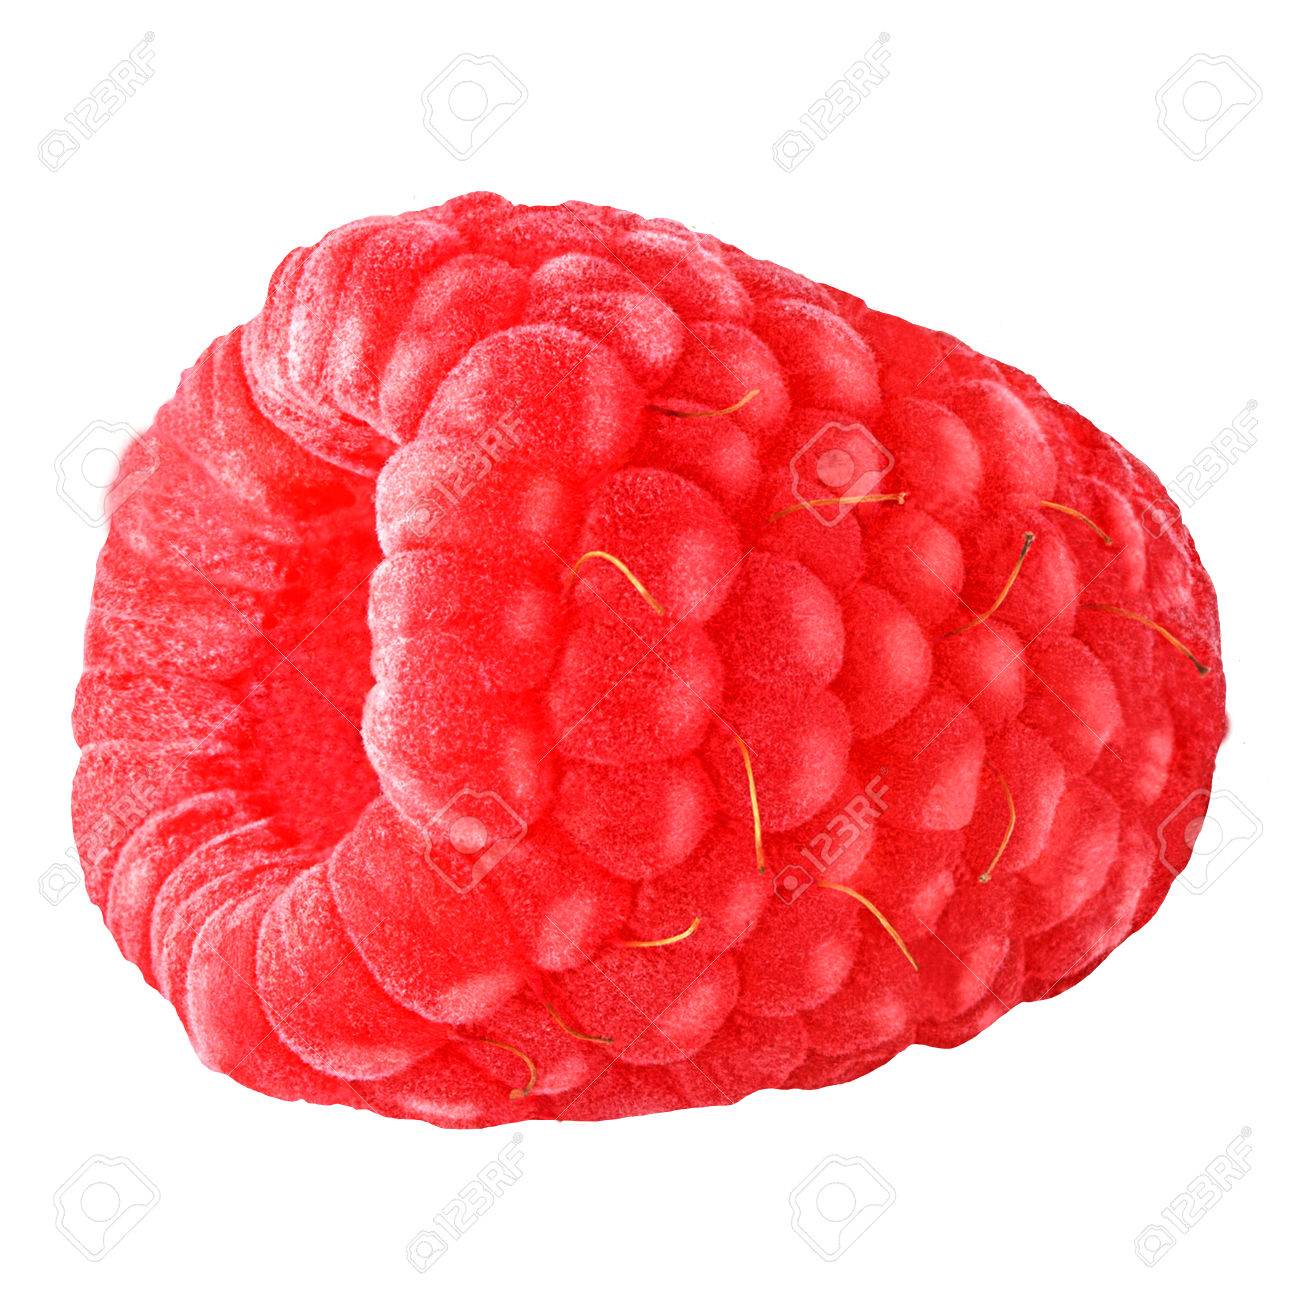 Isolated Fruits One Raspberry On White Background As